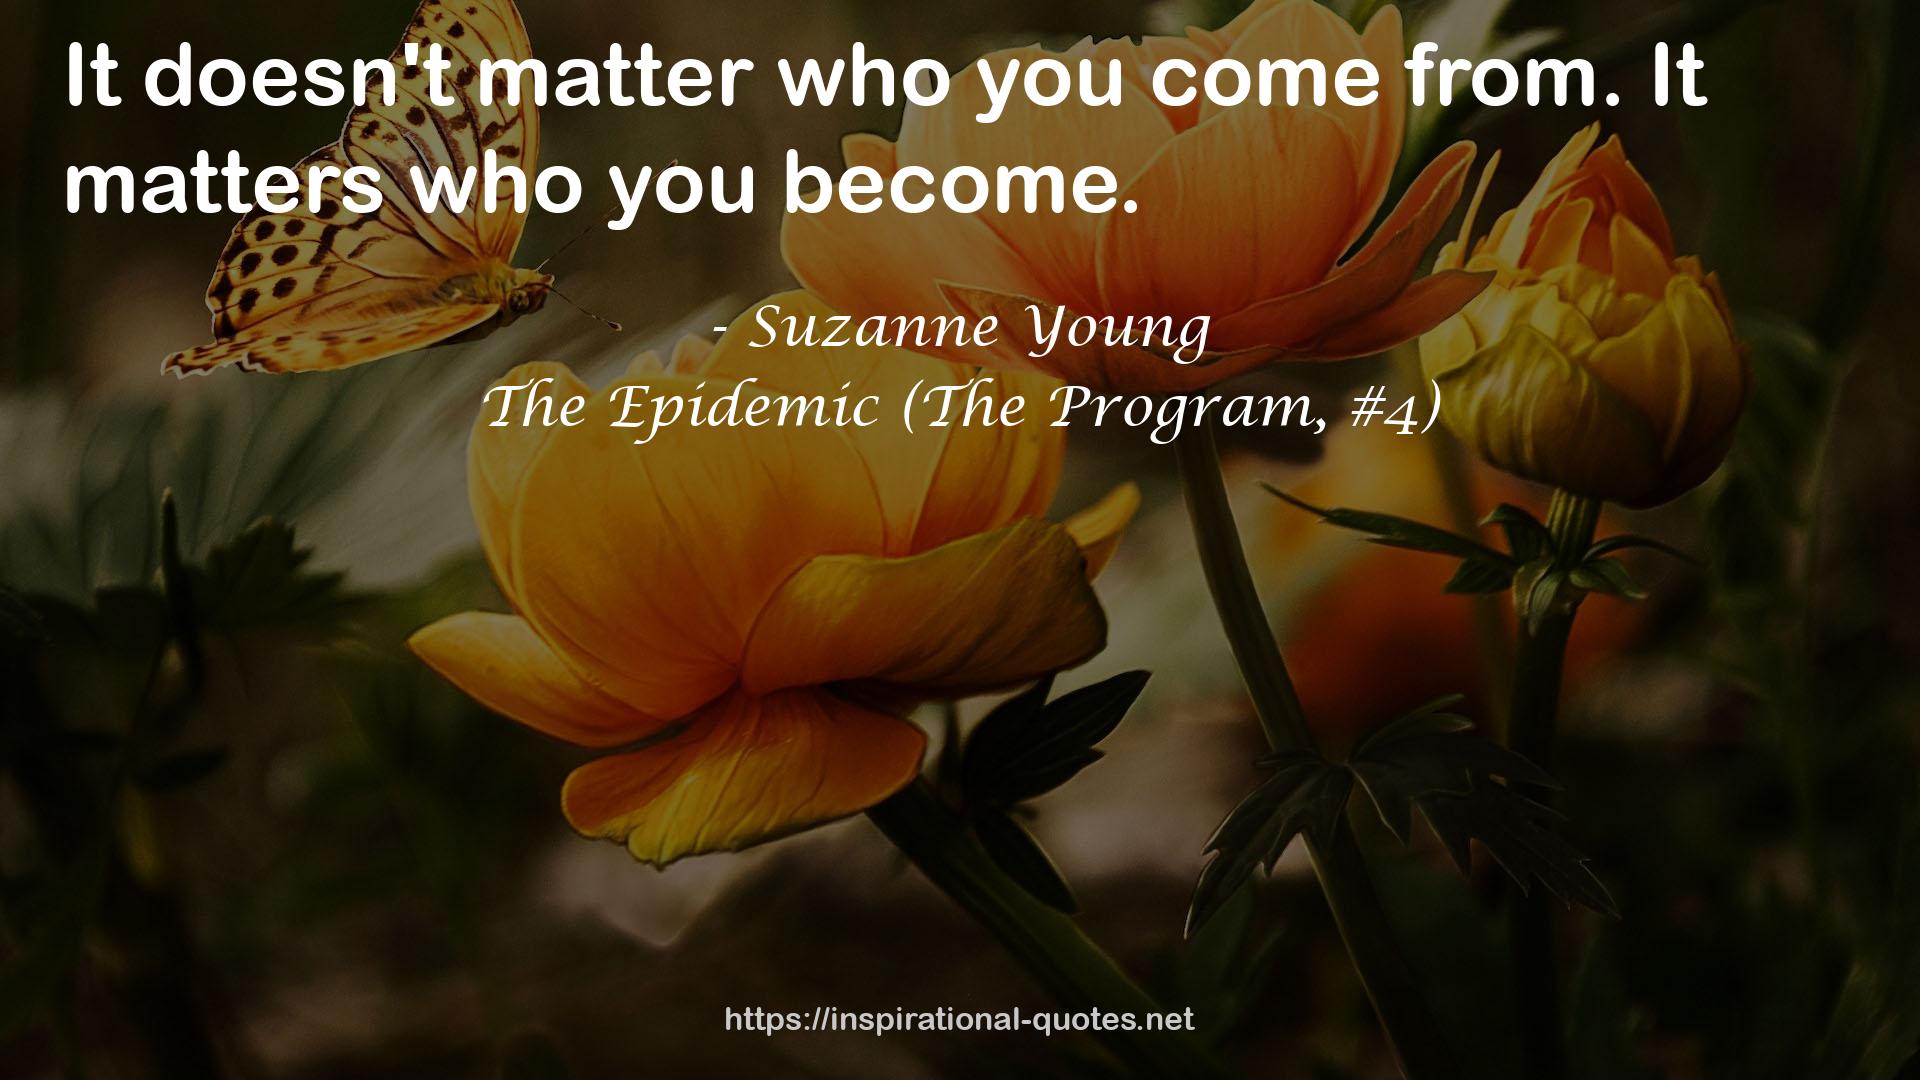 The Epidemic (The Program, #4) QUOTES